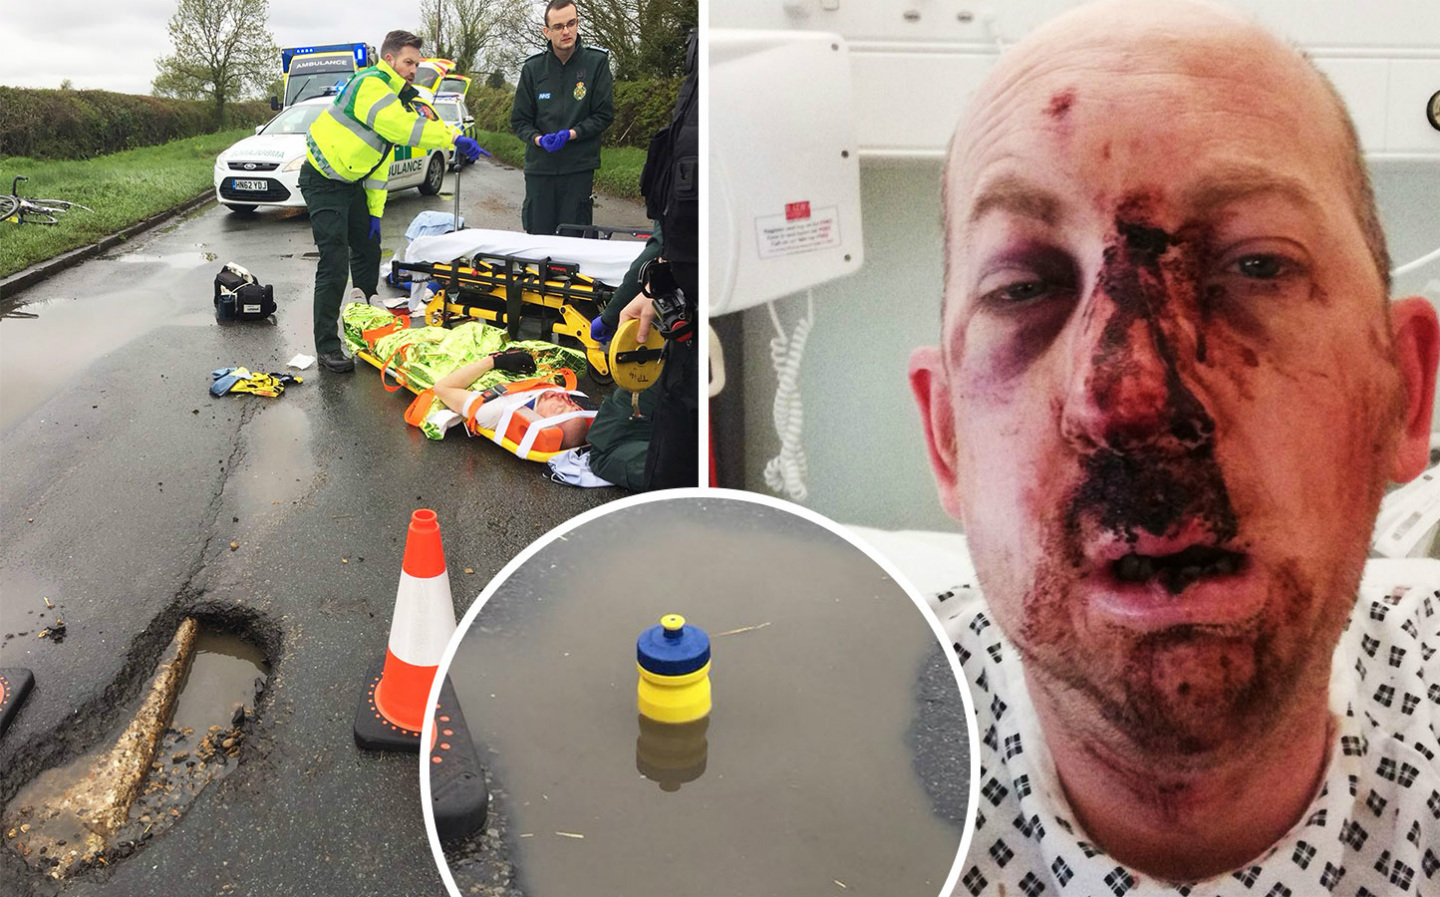 Simon Moss, a 44-year old cyclist, suffered severe injuries to his face, a broken jaw and a fractured spine after being thrown from his bike